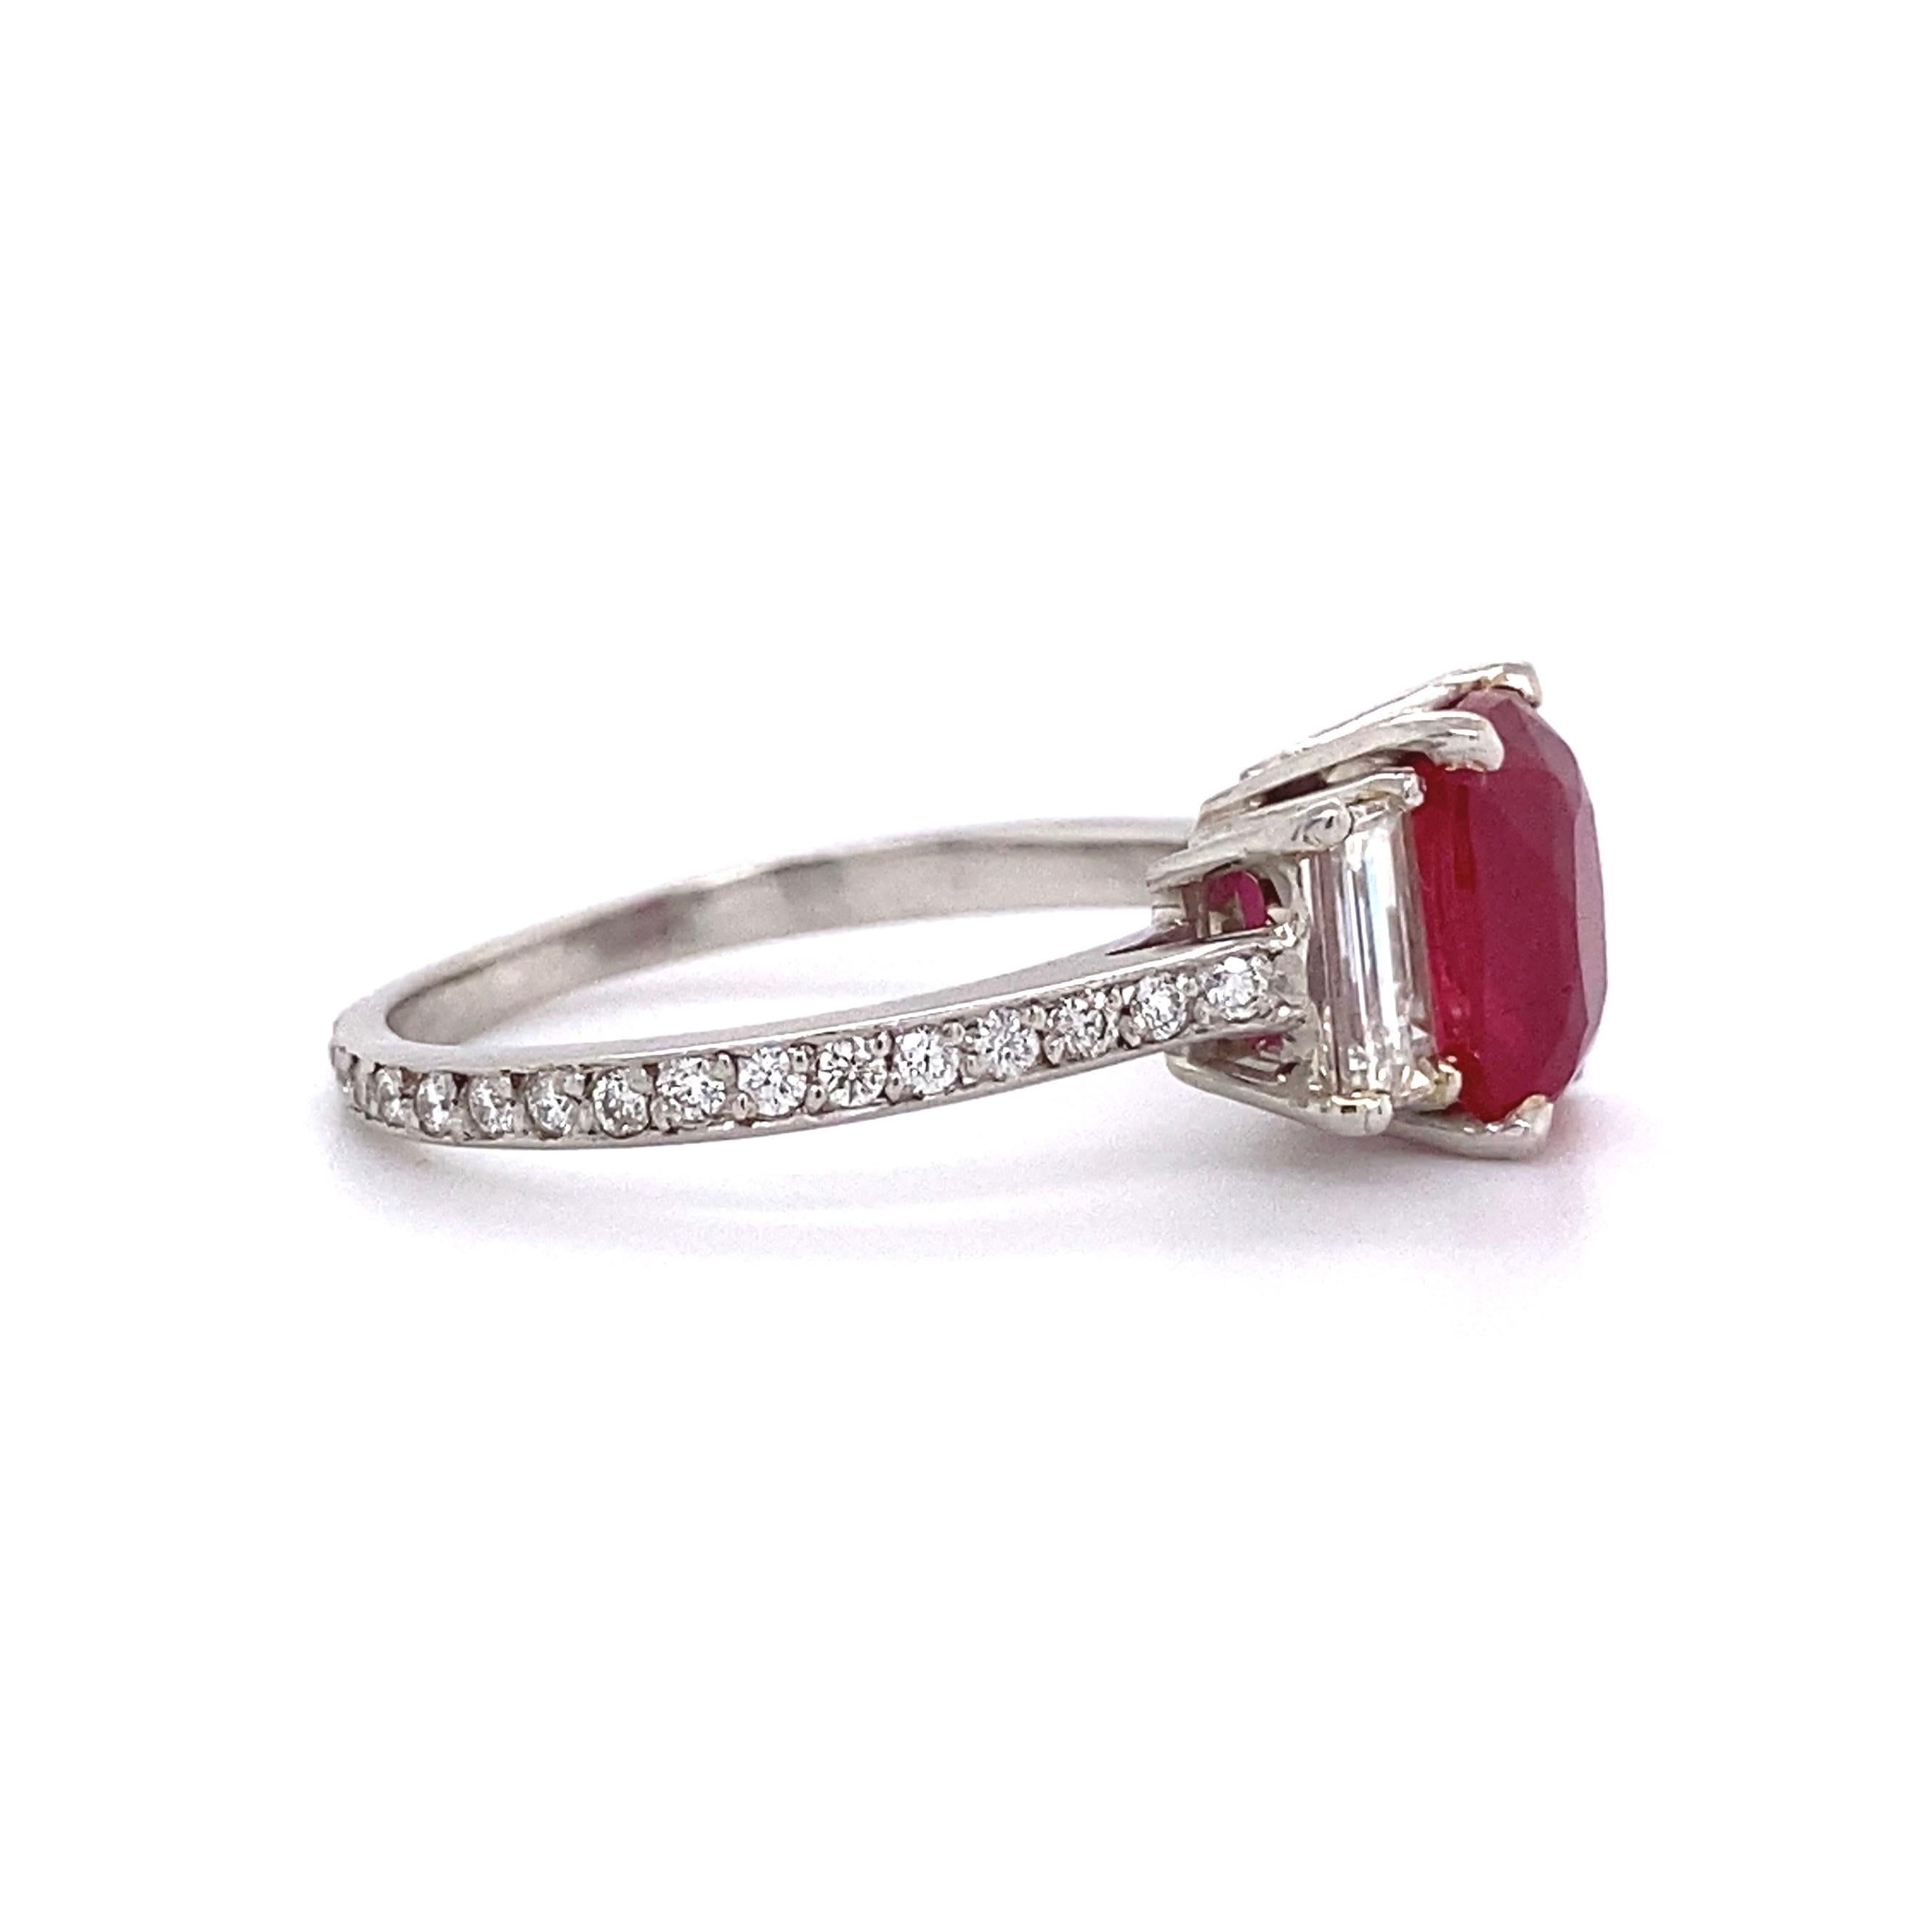 2.57 Carat Cushion Ruby and Diamond Cocktail Platinum Ring Estate Fine Jewelry In Excellent Condition For Sale In Montreal, QC